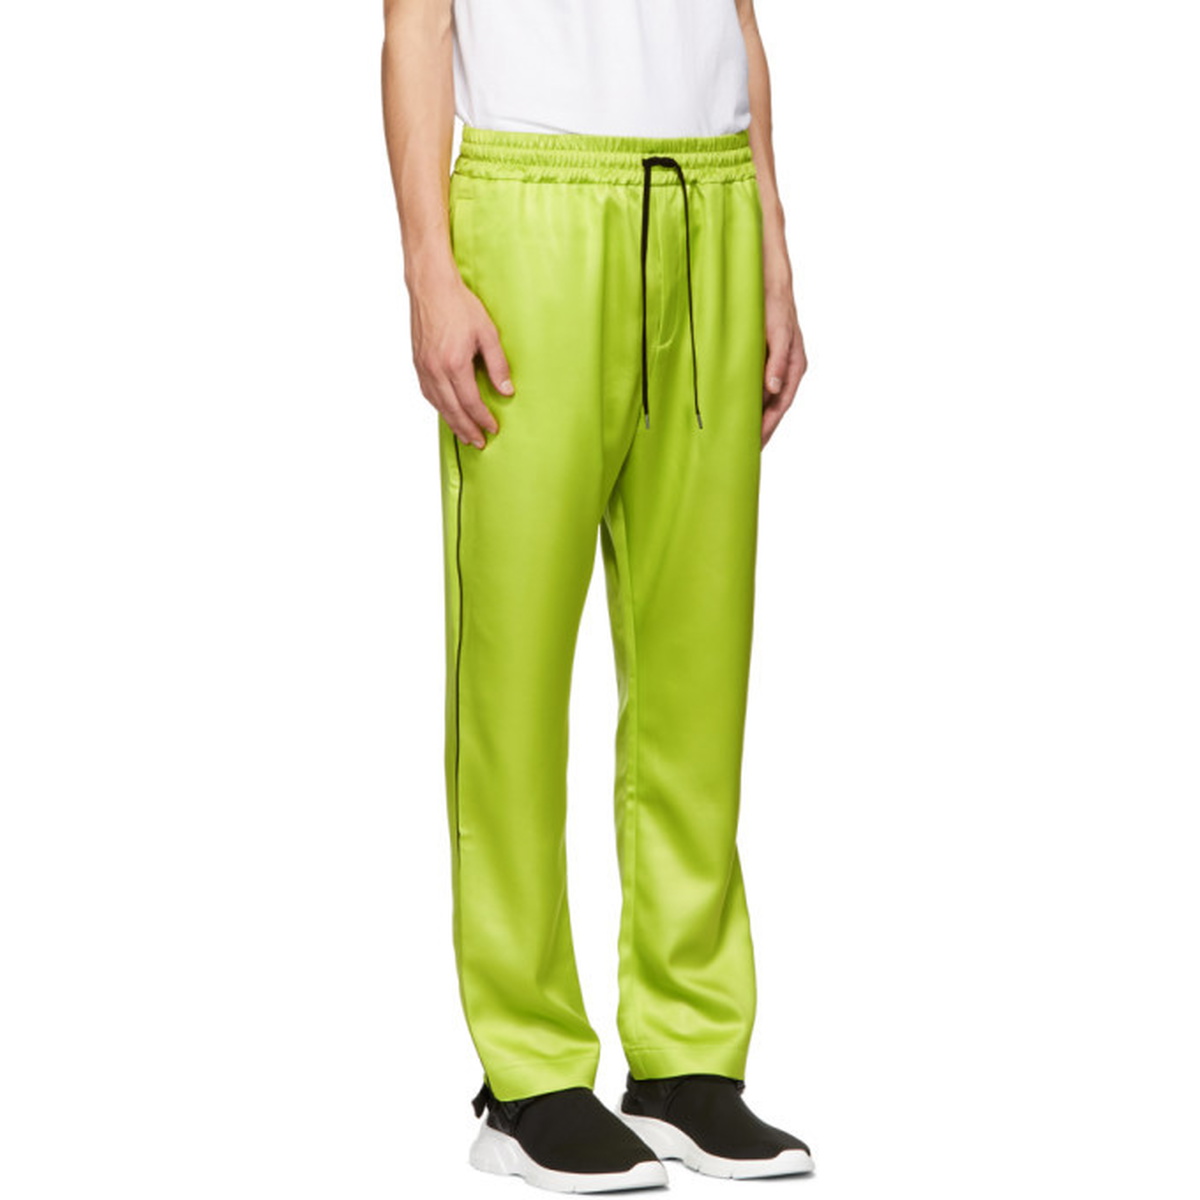 CMMN SWDN Yellow Buck Piping Track Pants CMMN SWDN